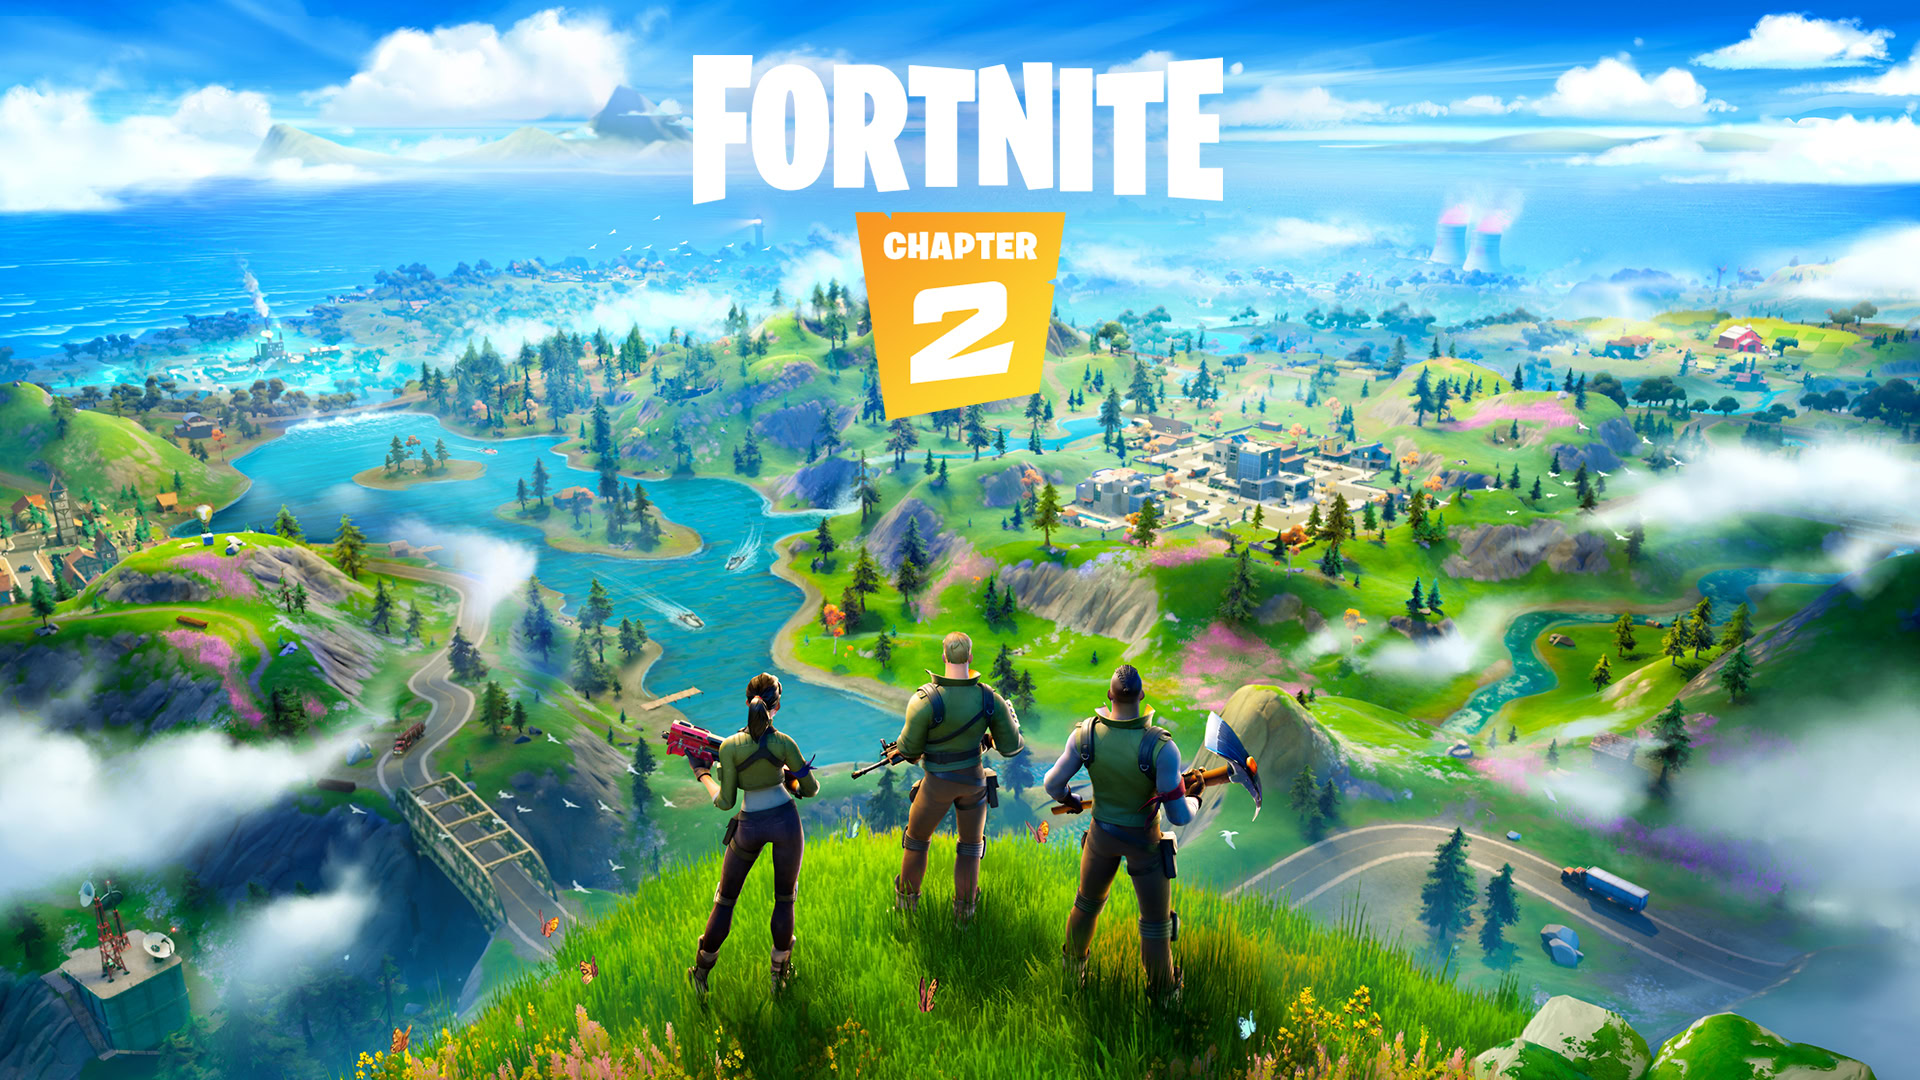 Is it possible to play 2-player on Fortnite Nintendo Switch